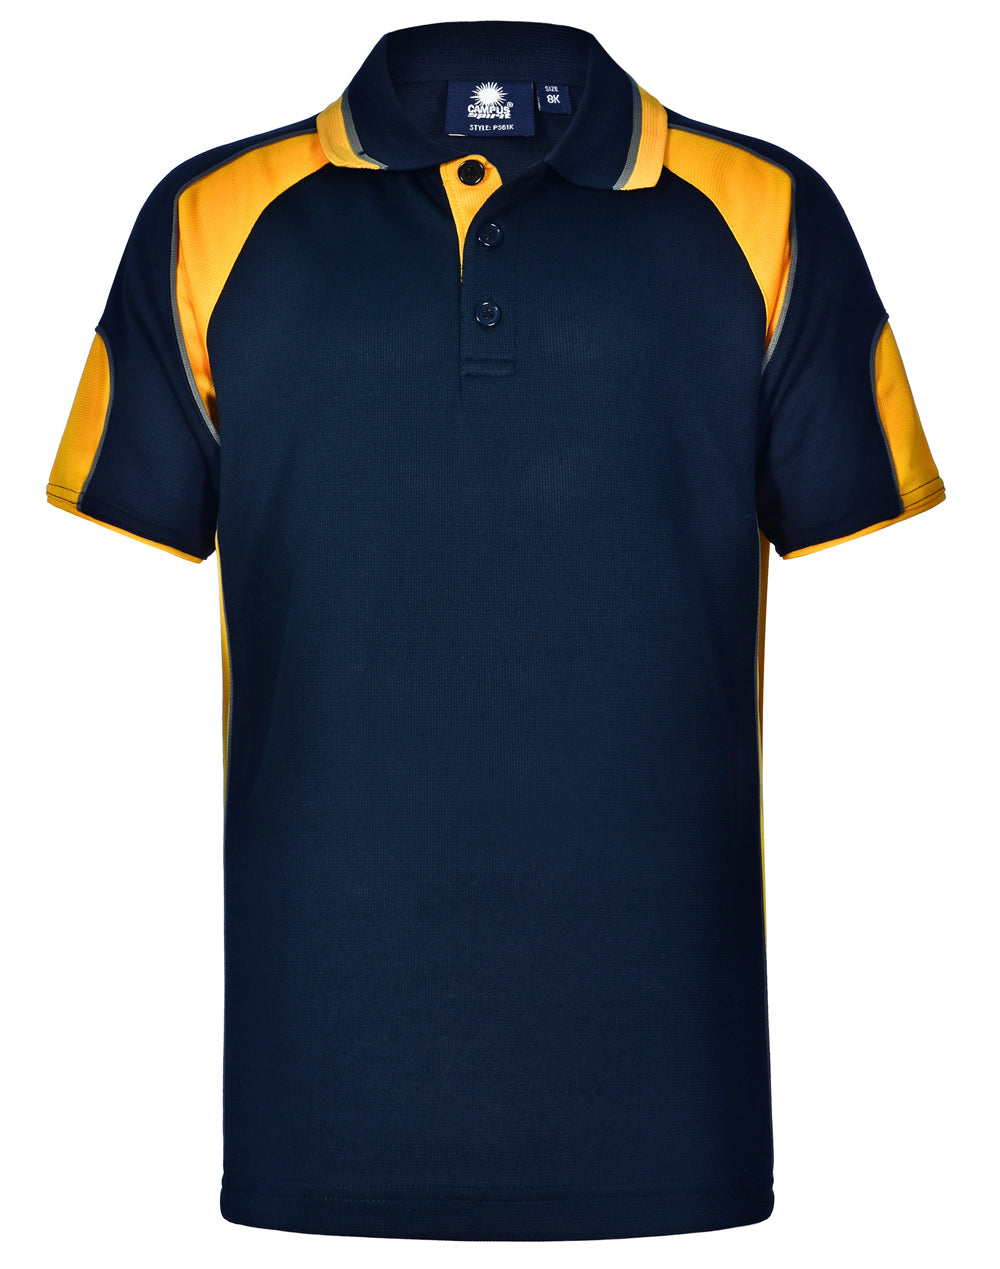 Winning Spirit Kids Cooldry Contrast Polo With Sleeve Panel - PS61K